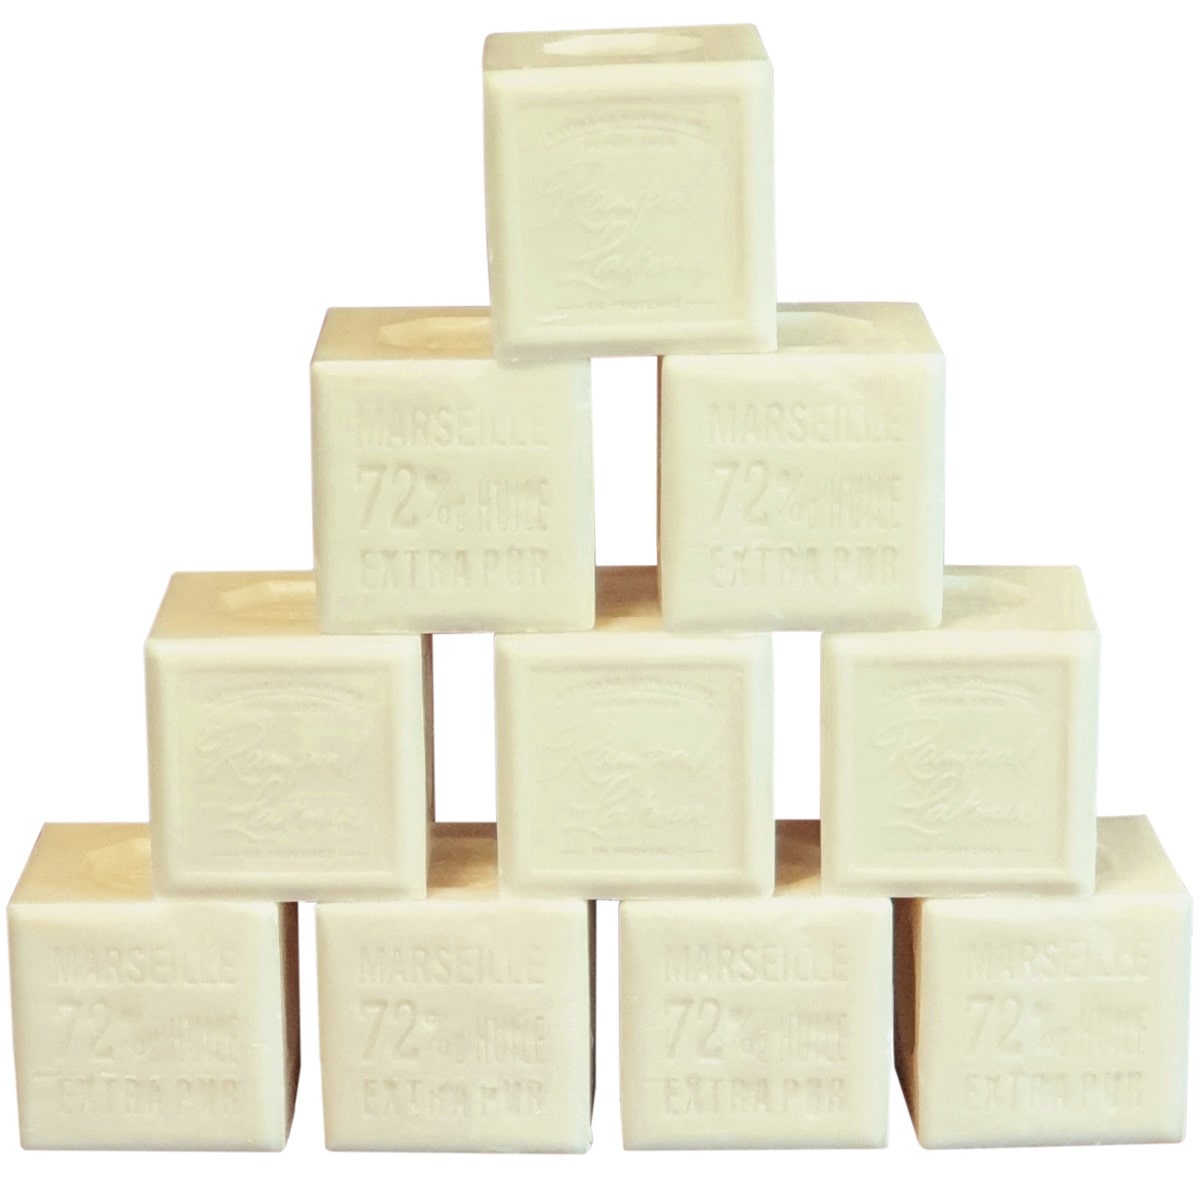 Box of 10 Marseille soap cubes with vegetable oils - Cosmos Natural